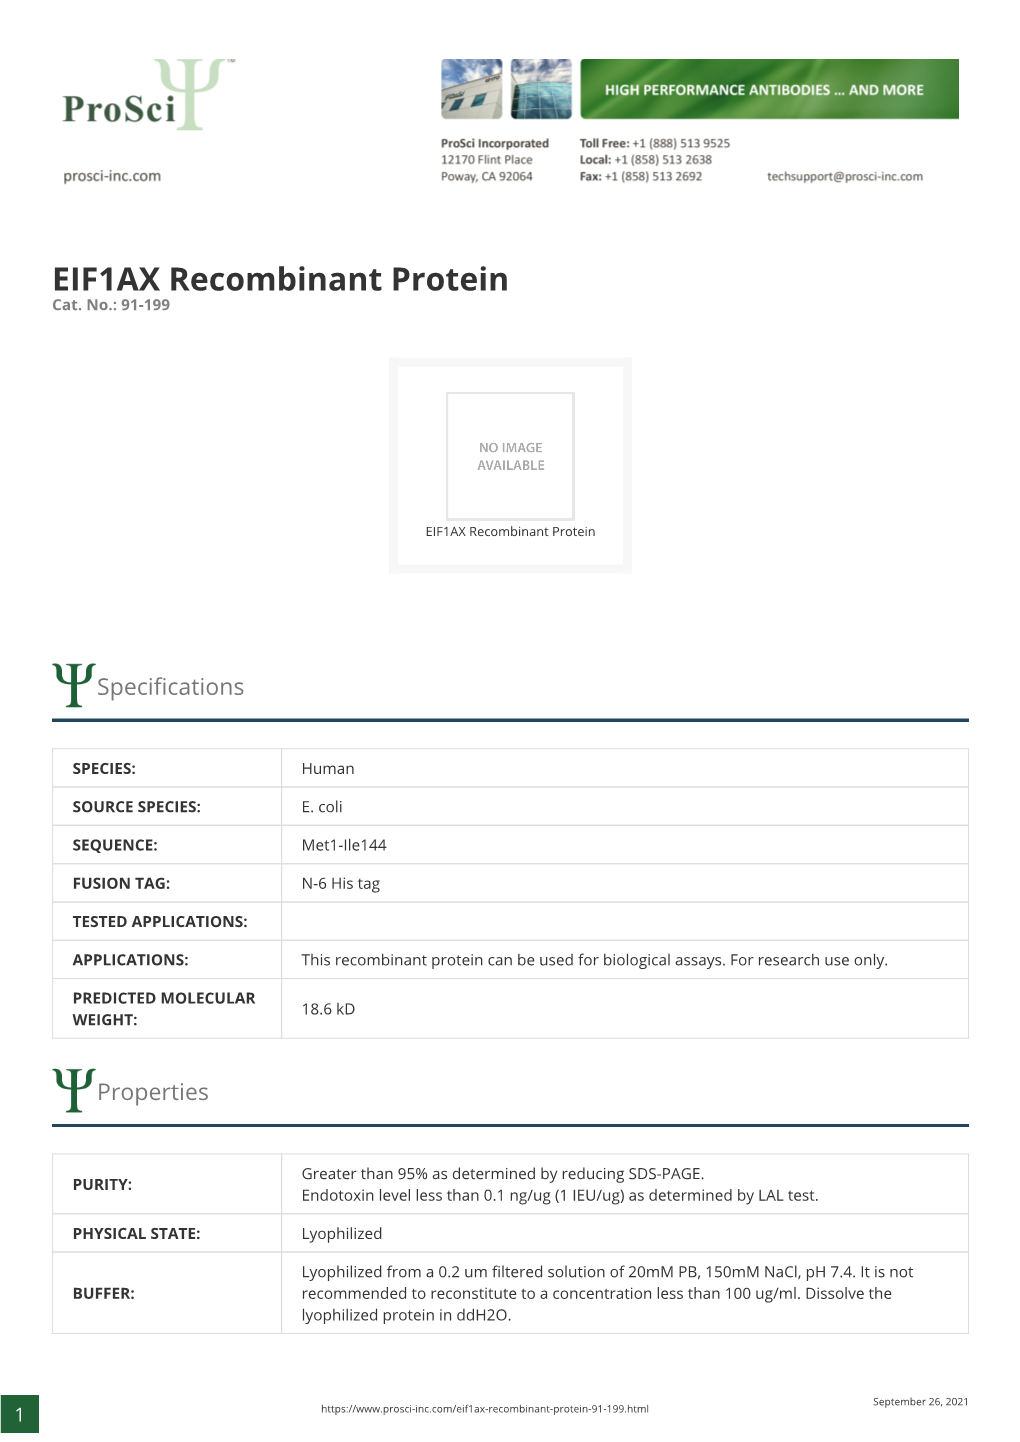 EIF1AX Recombinant Protein Cat